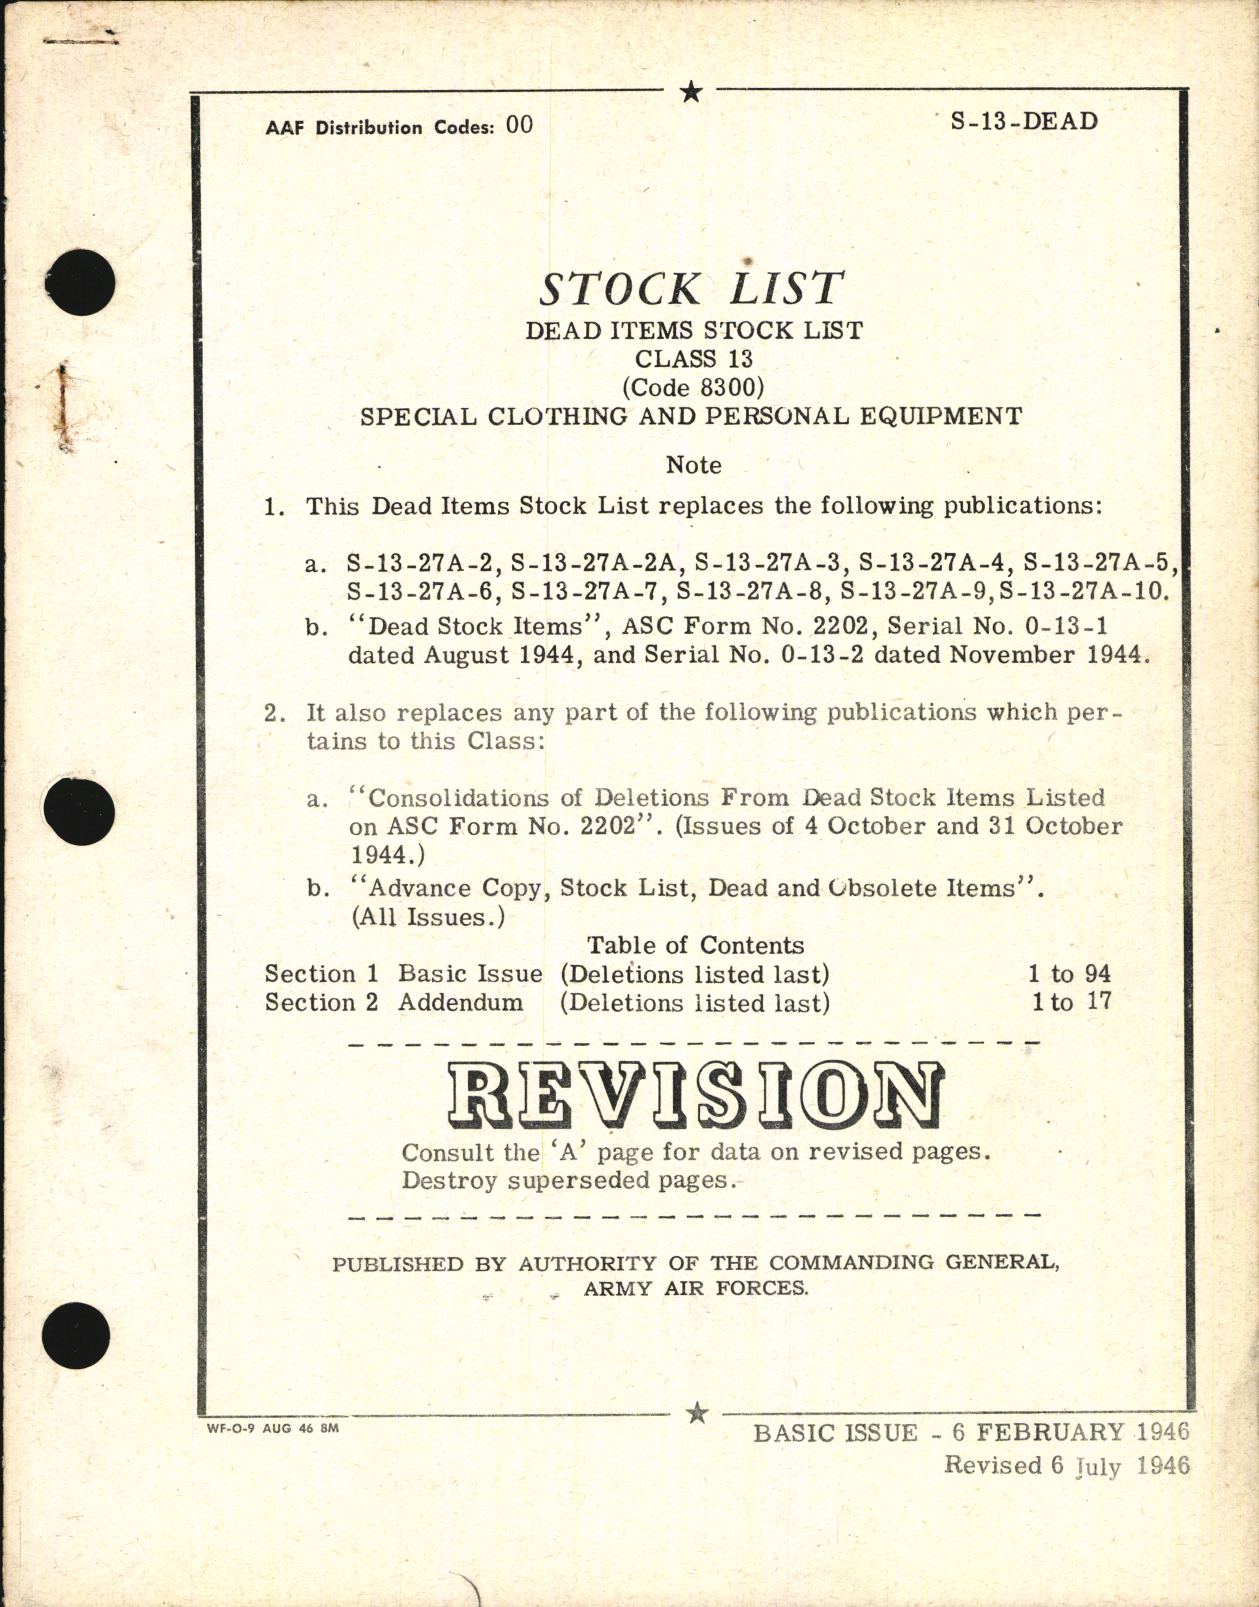 Sample page 1 from AirCorps Library document: Dead Items Stock List for Special Clothing and Personal Equipment